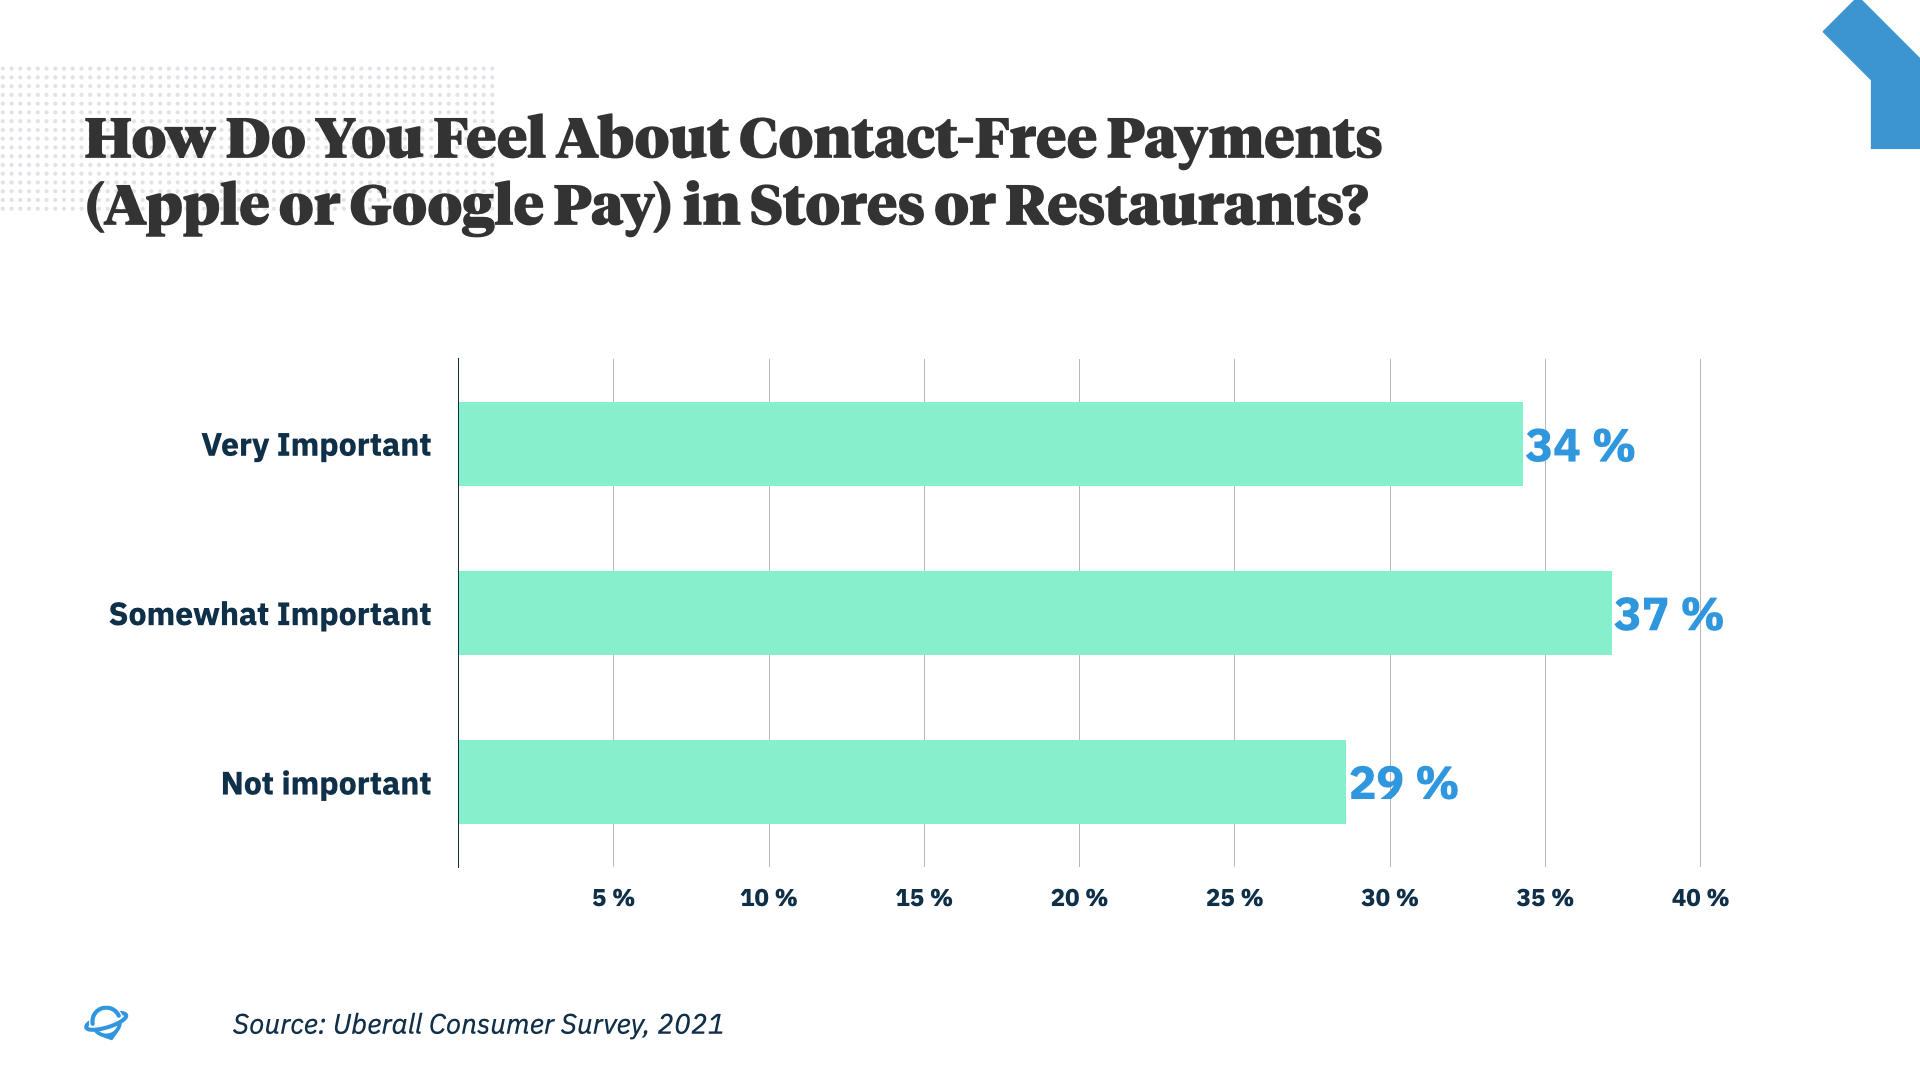 71% of consumers find contact-free payments like Apple Pay or Google Pay important.